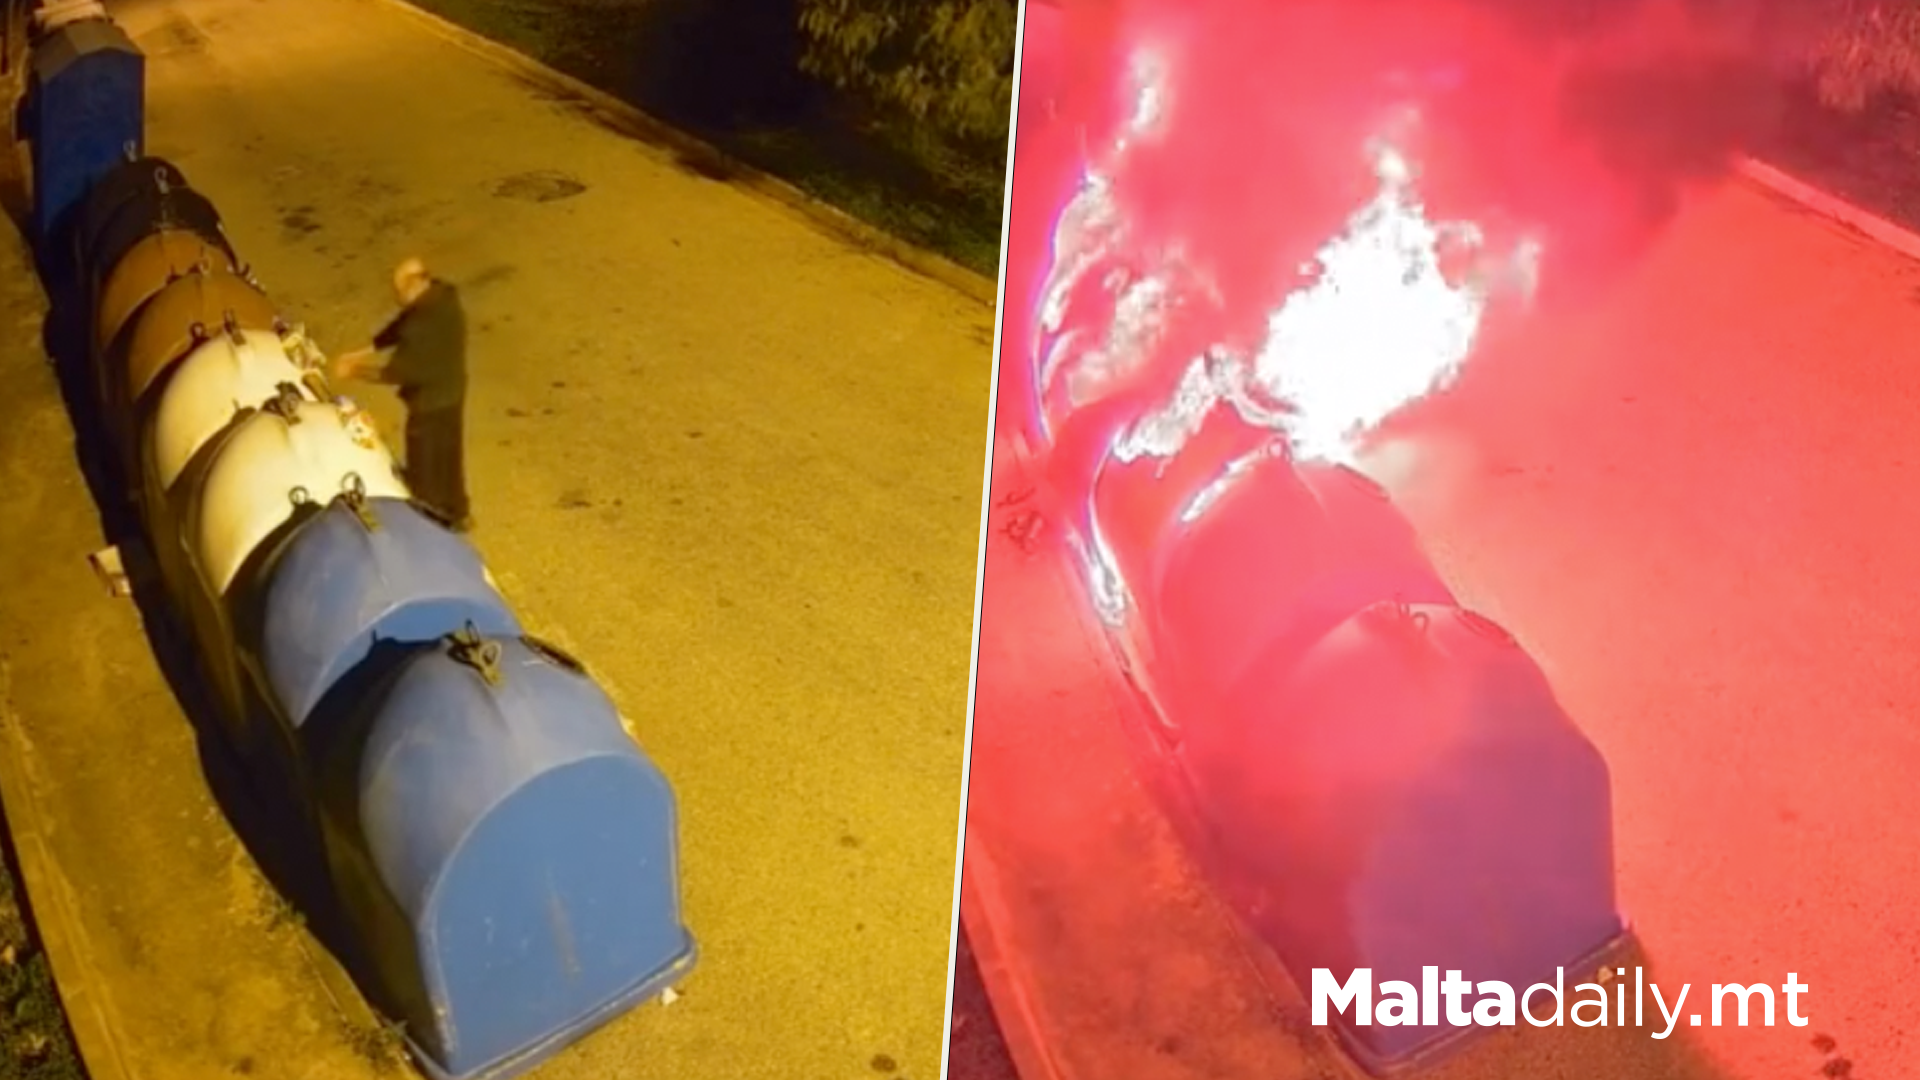 CCTV Footage Shows Man Setting Recycling Bins On Fire